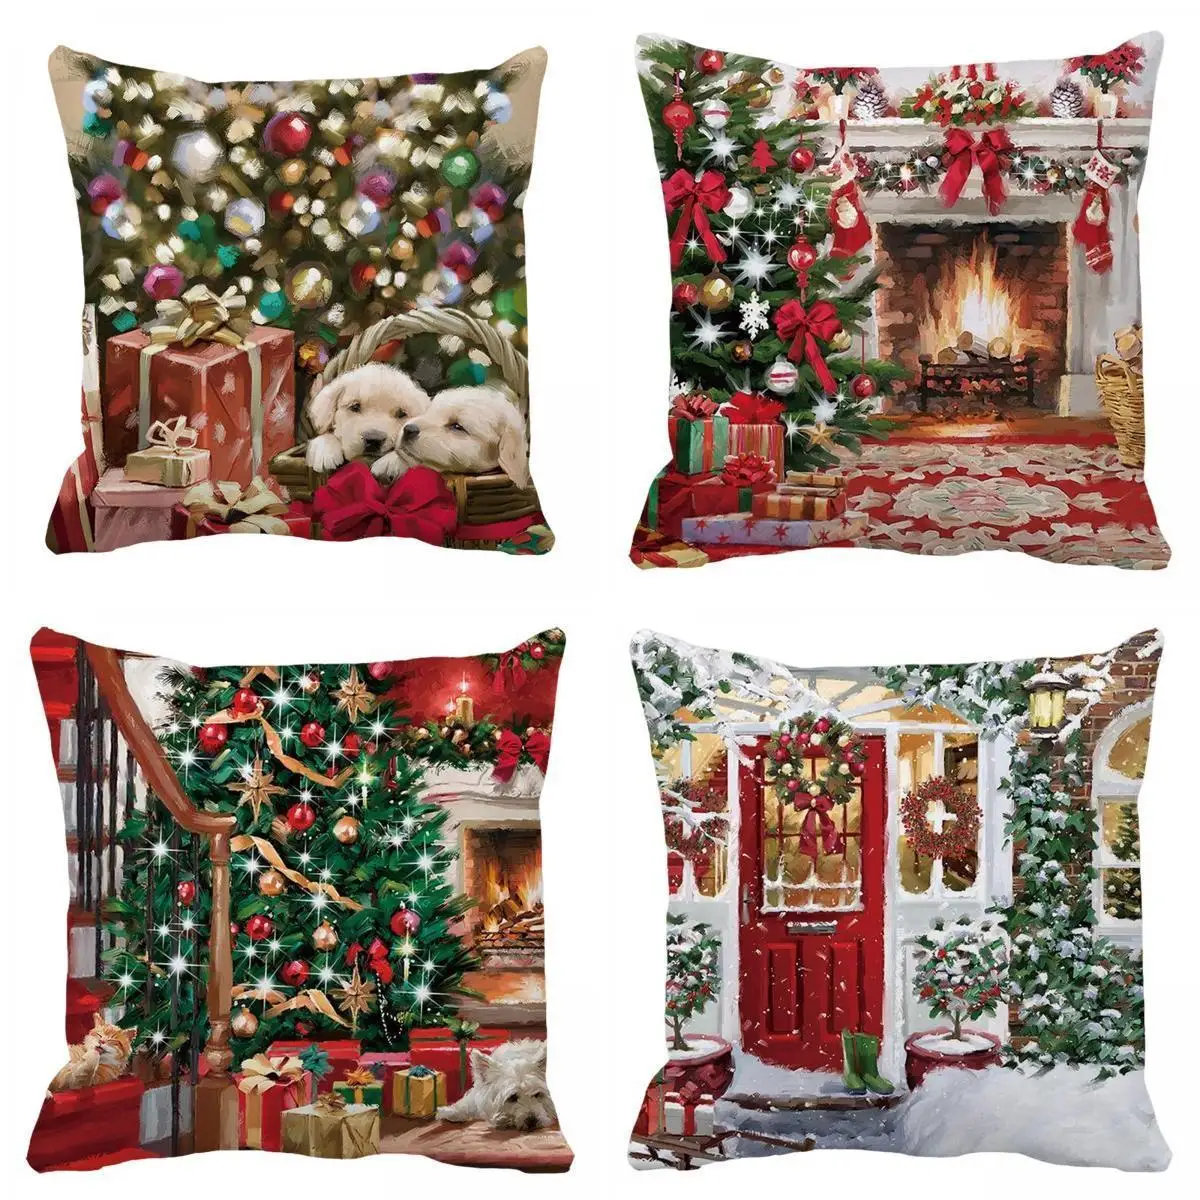 Christmas Pillow Cover Pillow Case 18x18 for Holiday Home Decoration